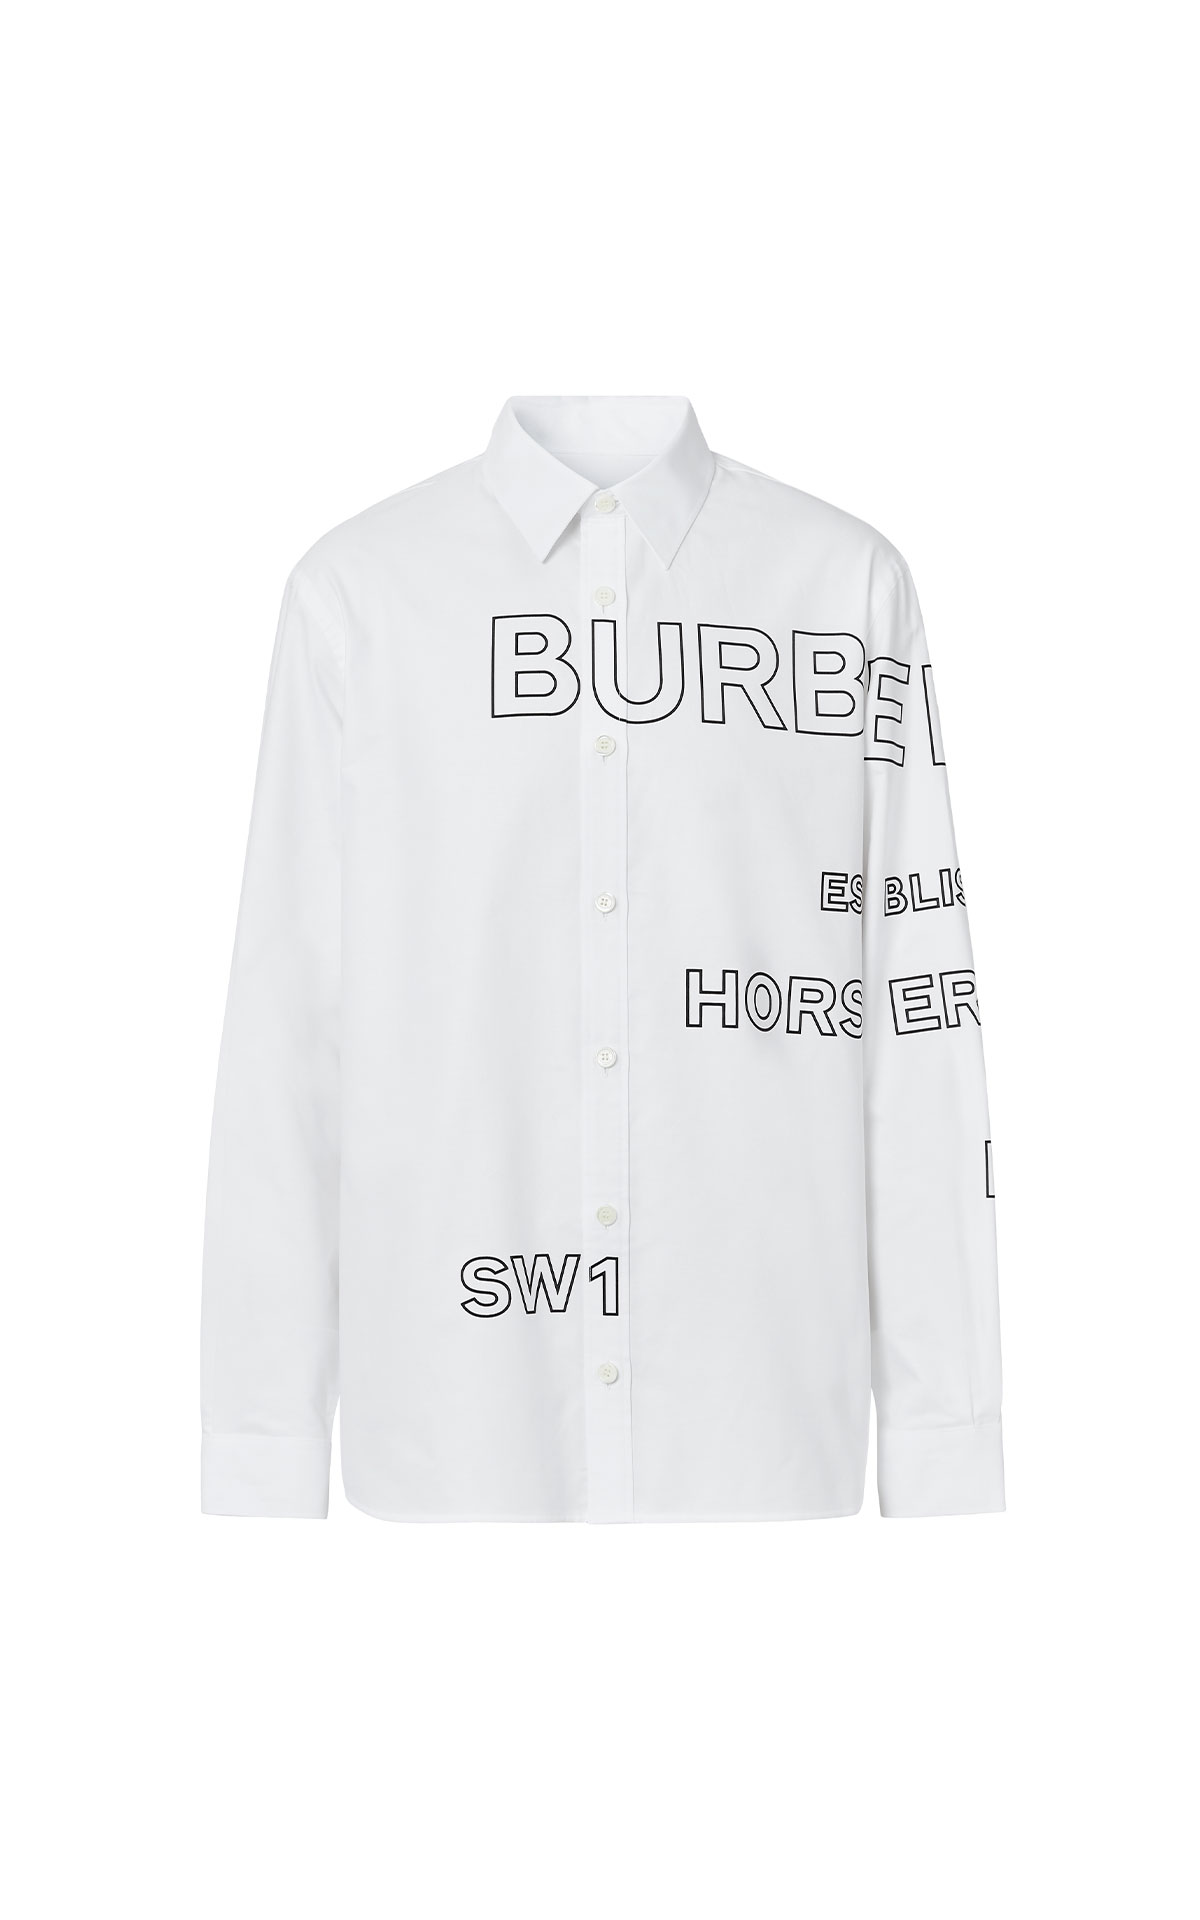 Burberry Long sleeves cotton logo shirt from Bicester Village